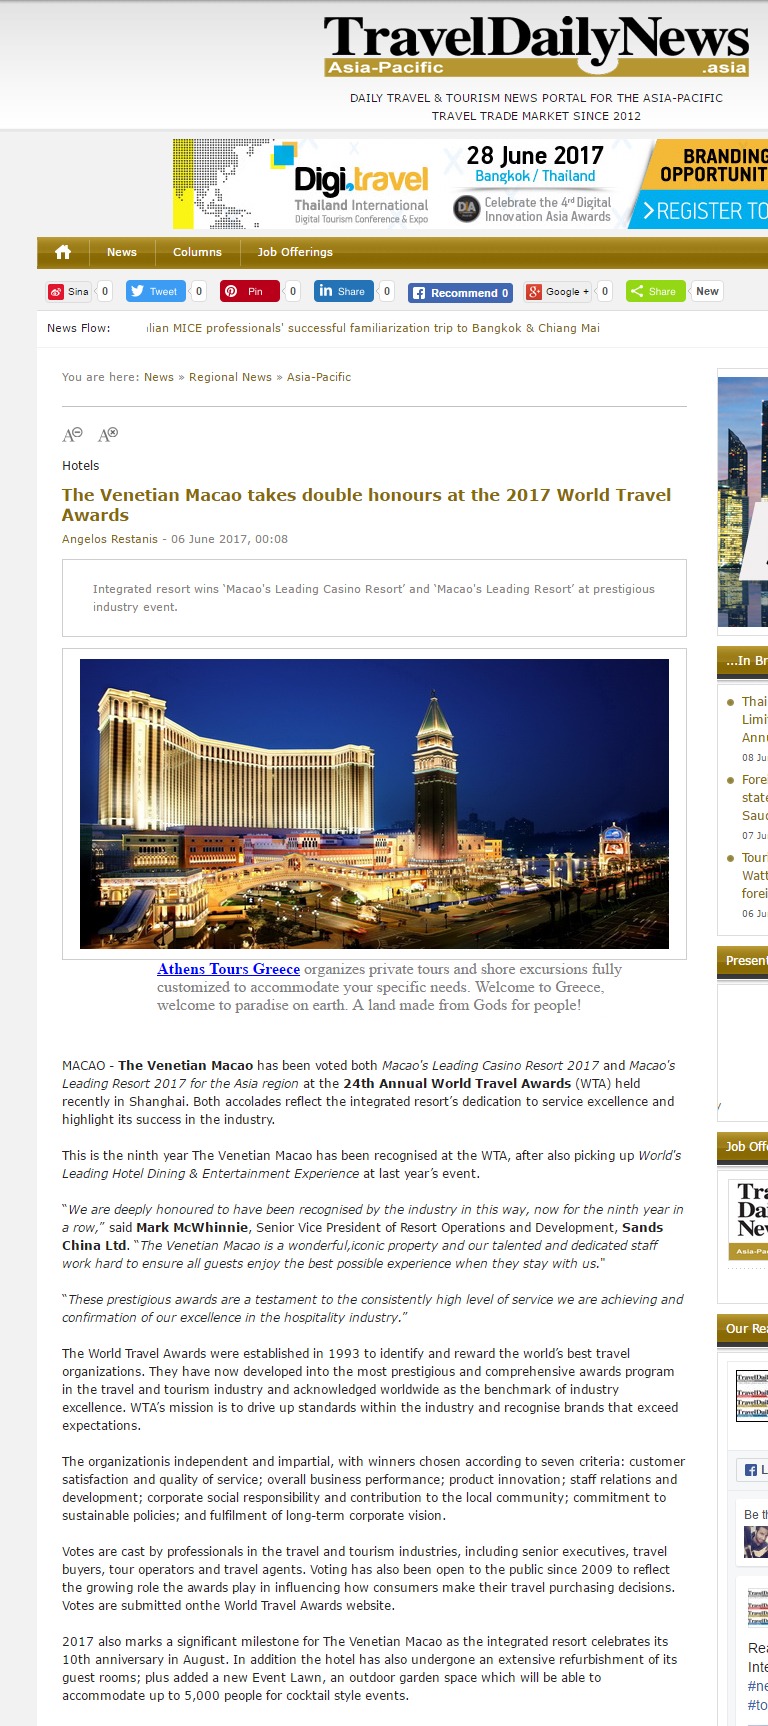 The Venetian Macao takes double honours at the 2017 World Travel Awards